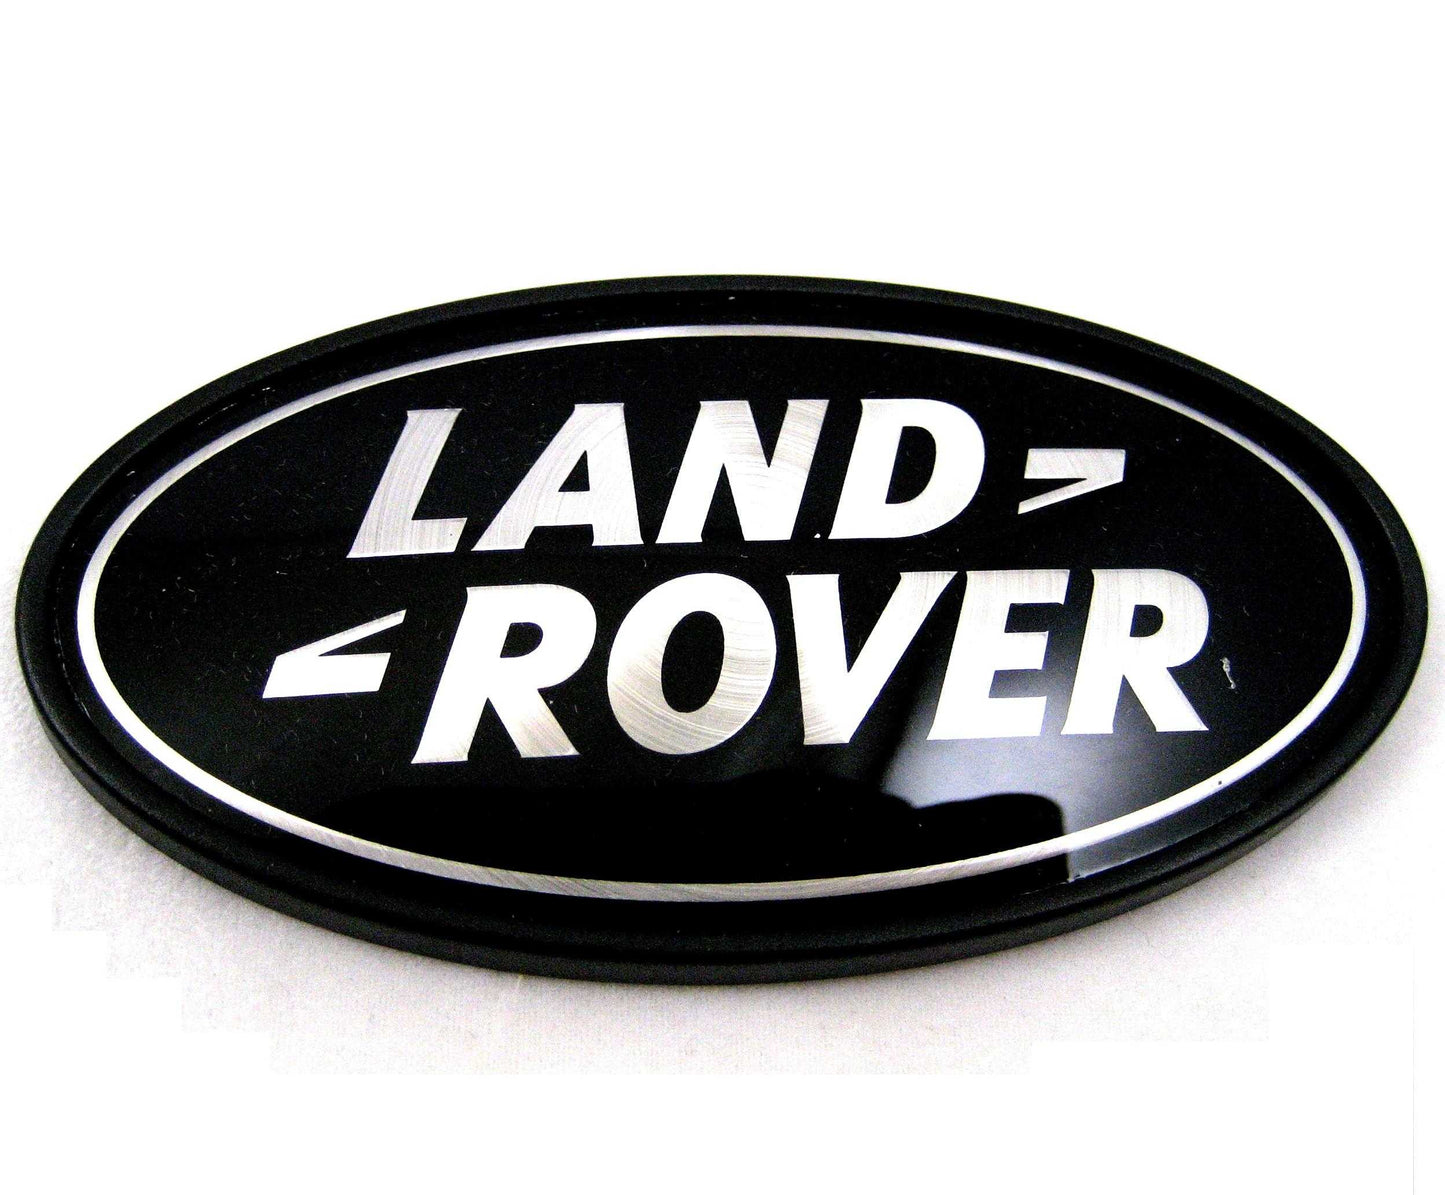 Genuine Rear Tailgate Badge - Black & Silver - for Land Rover Discovery 1 & 2